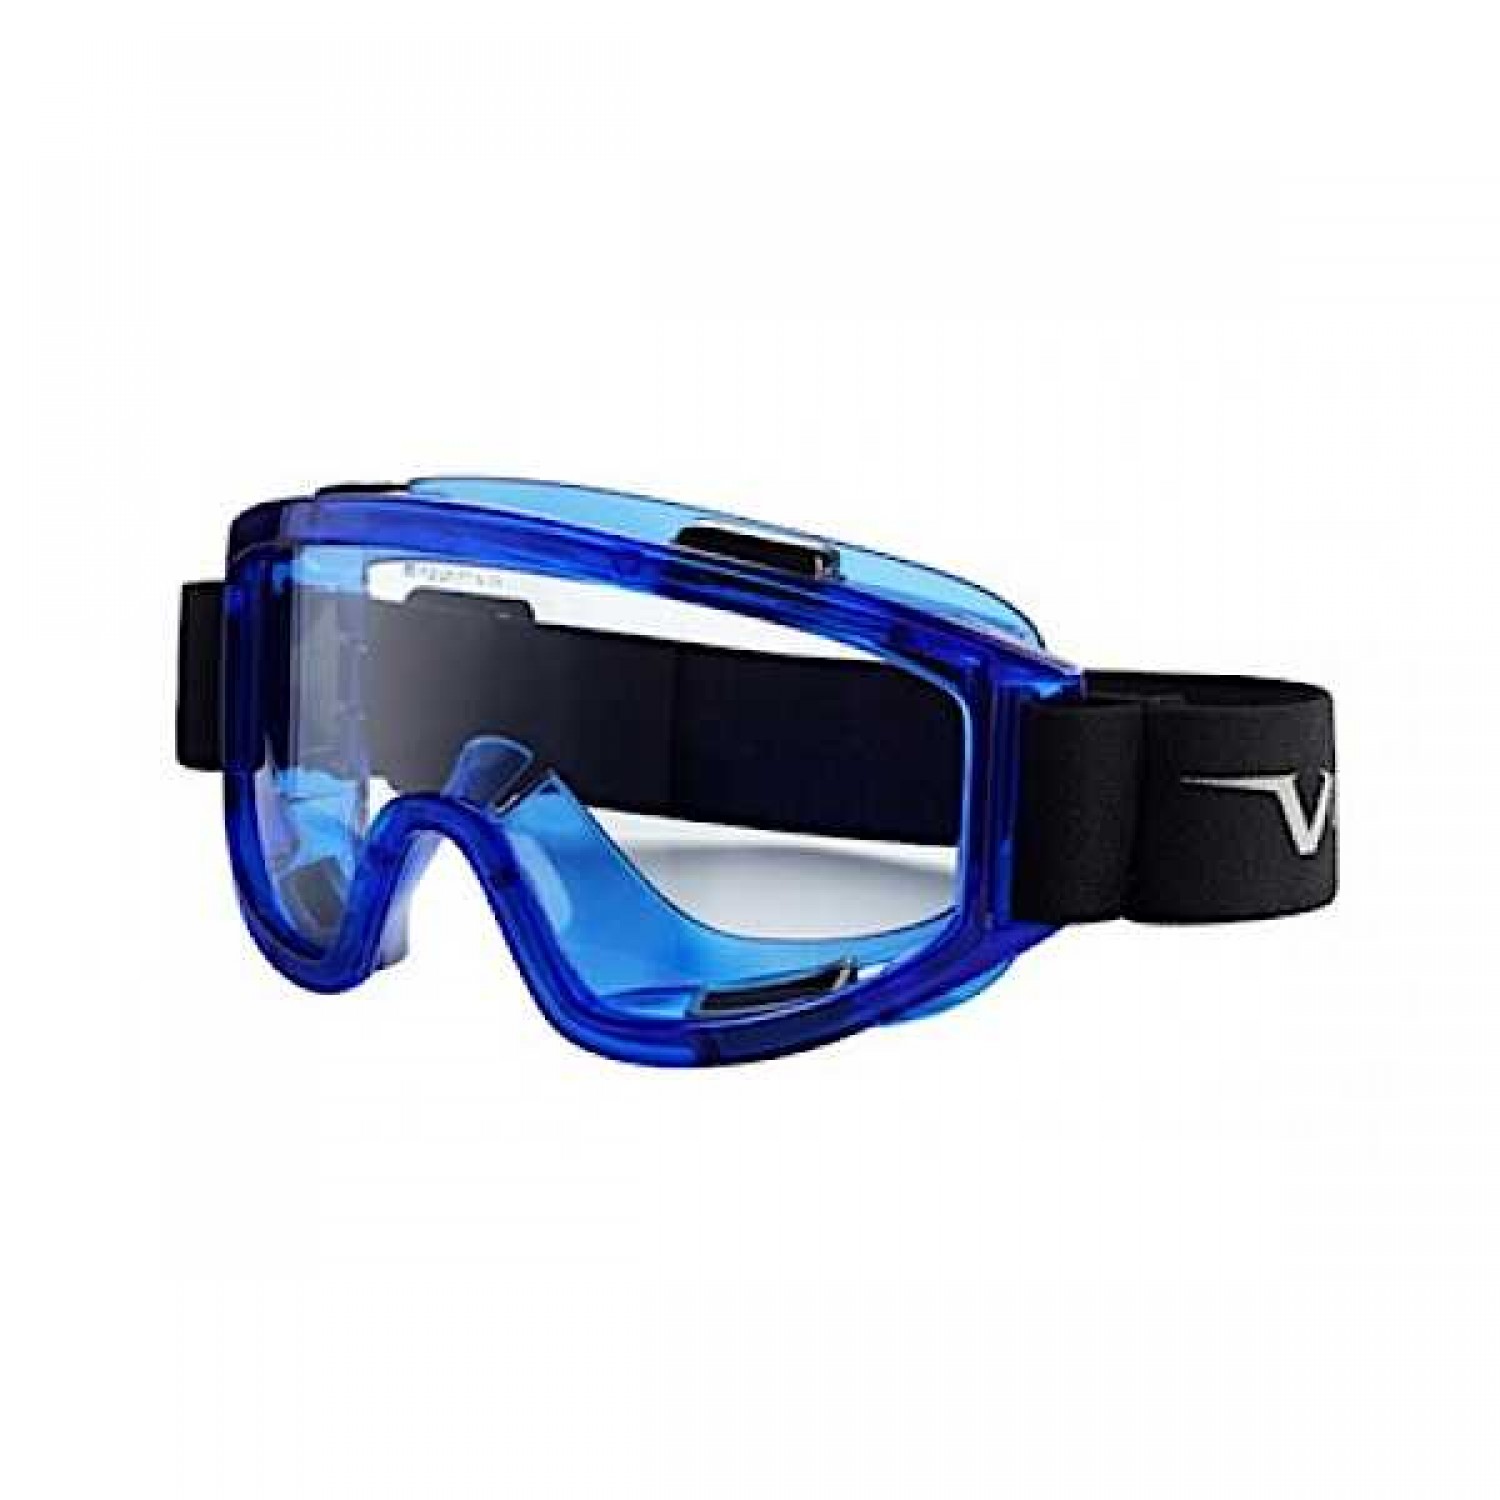 Indirectly Vented Safety Goggles UNIVET 601.02.77.01